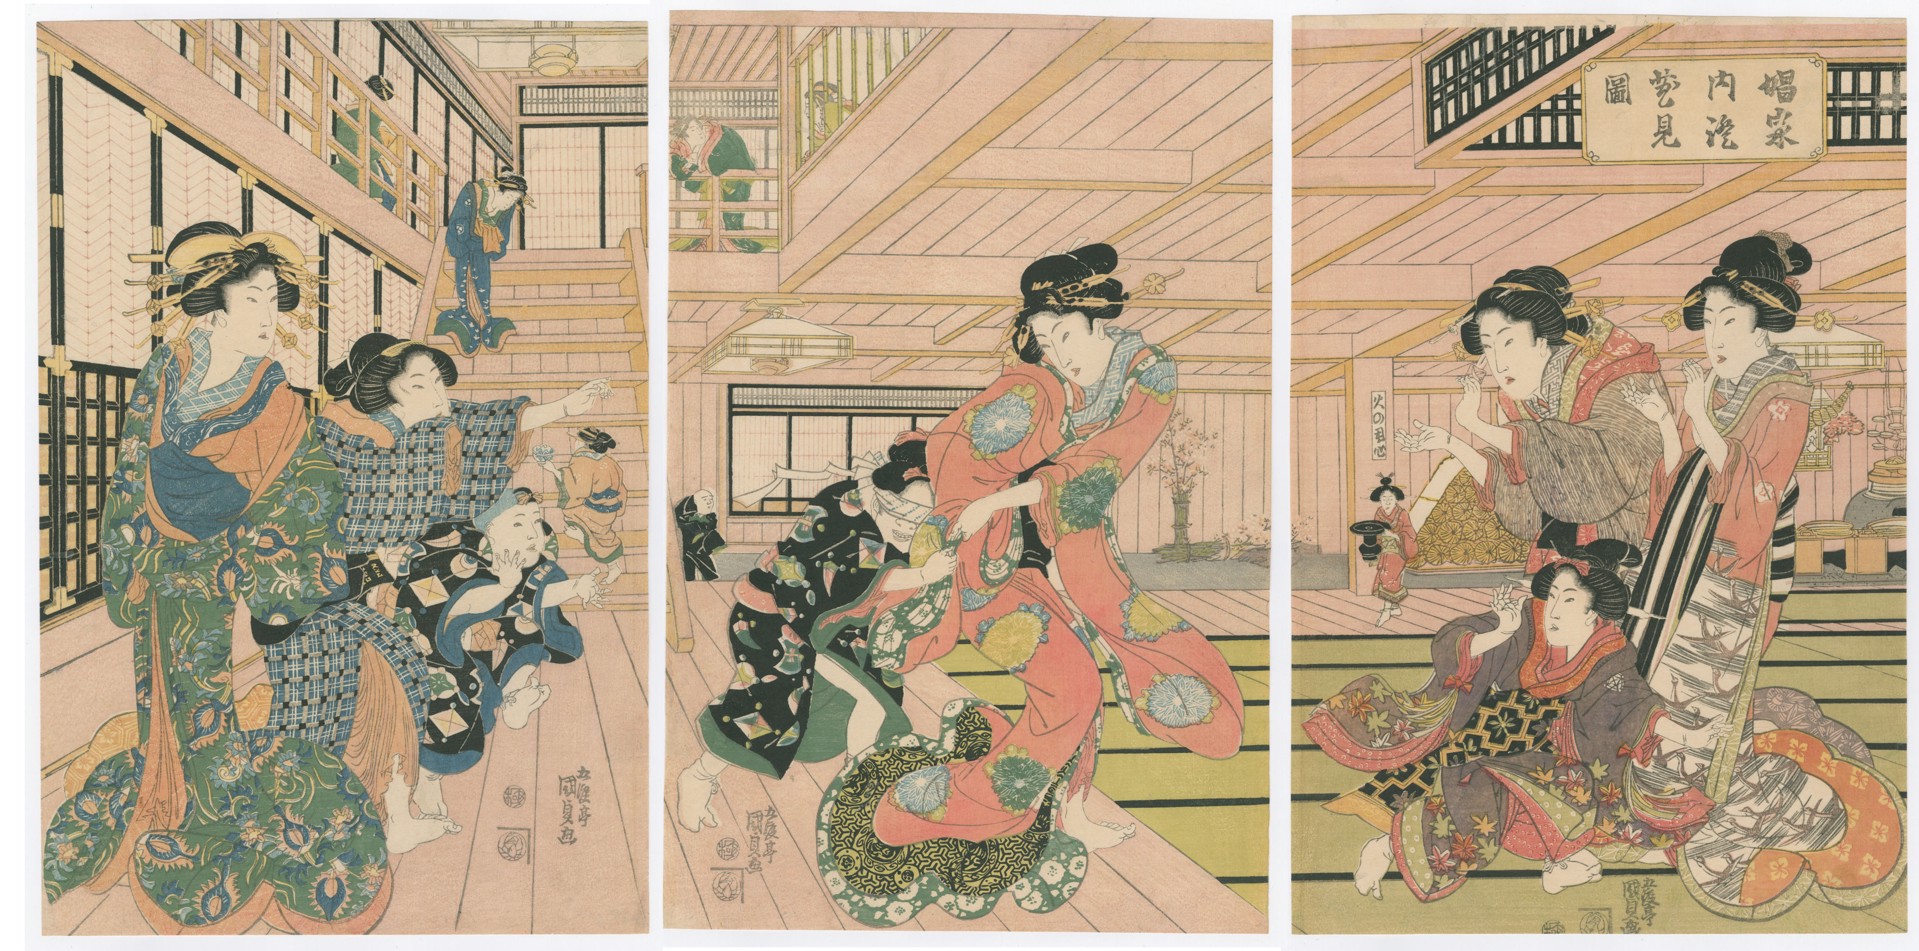 Courtesans Entertaining Themselves in a Brothel by Kunisada